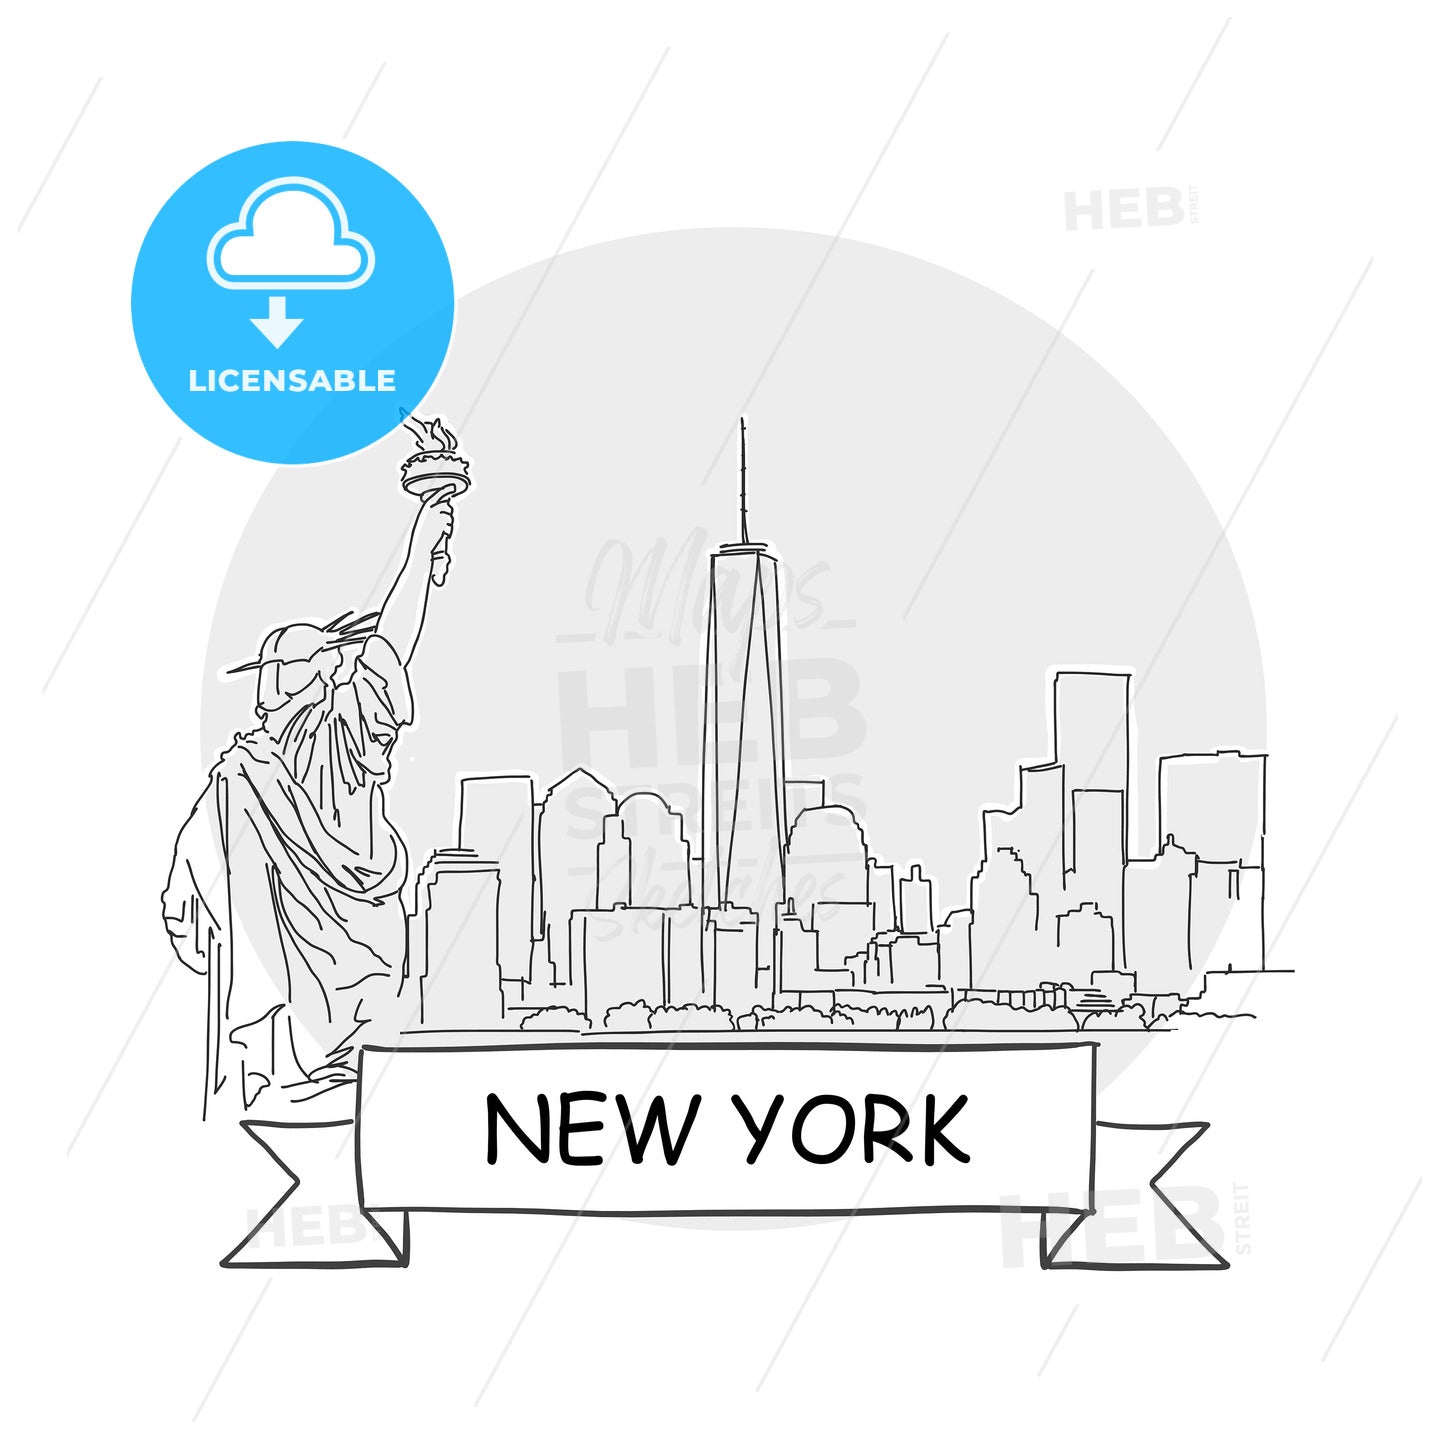 New York hand-drawn urban vector sign – instant download